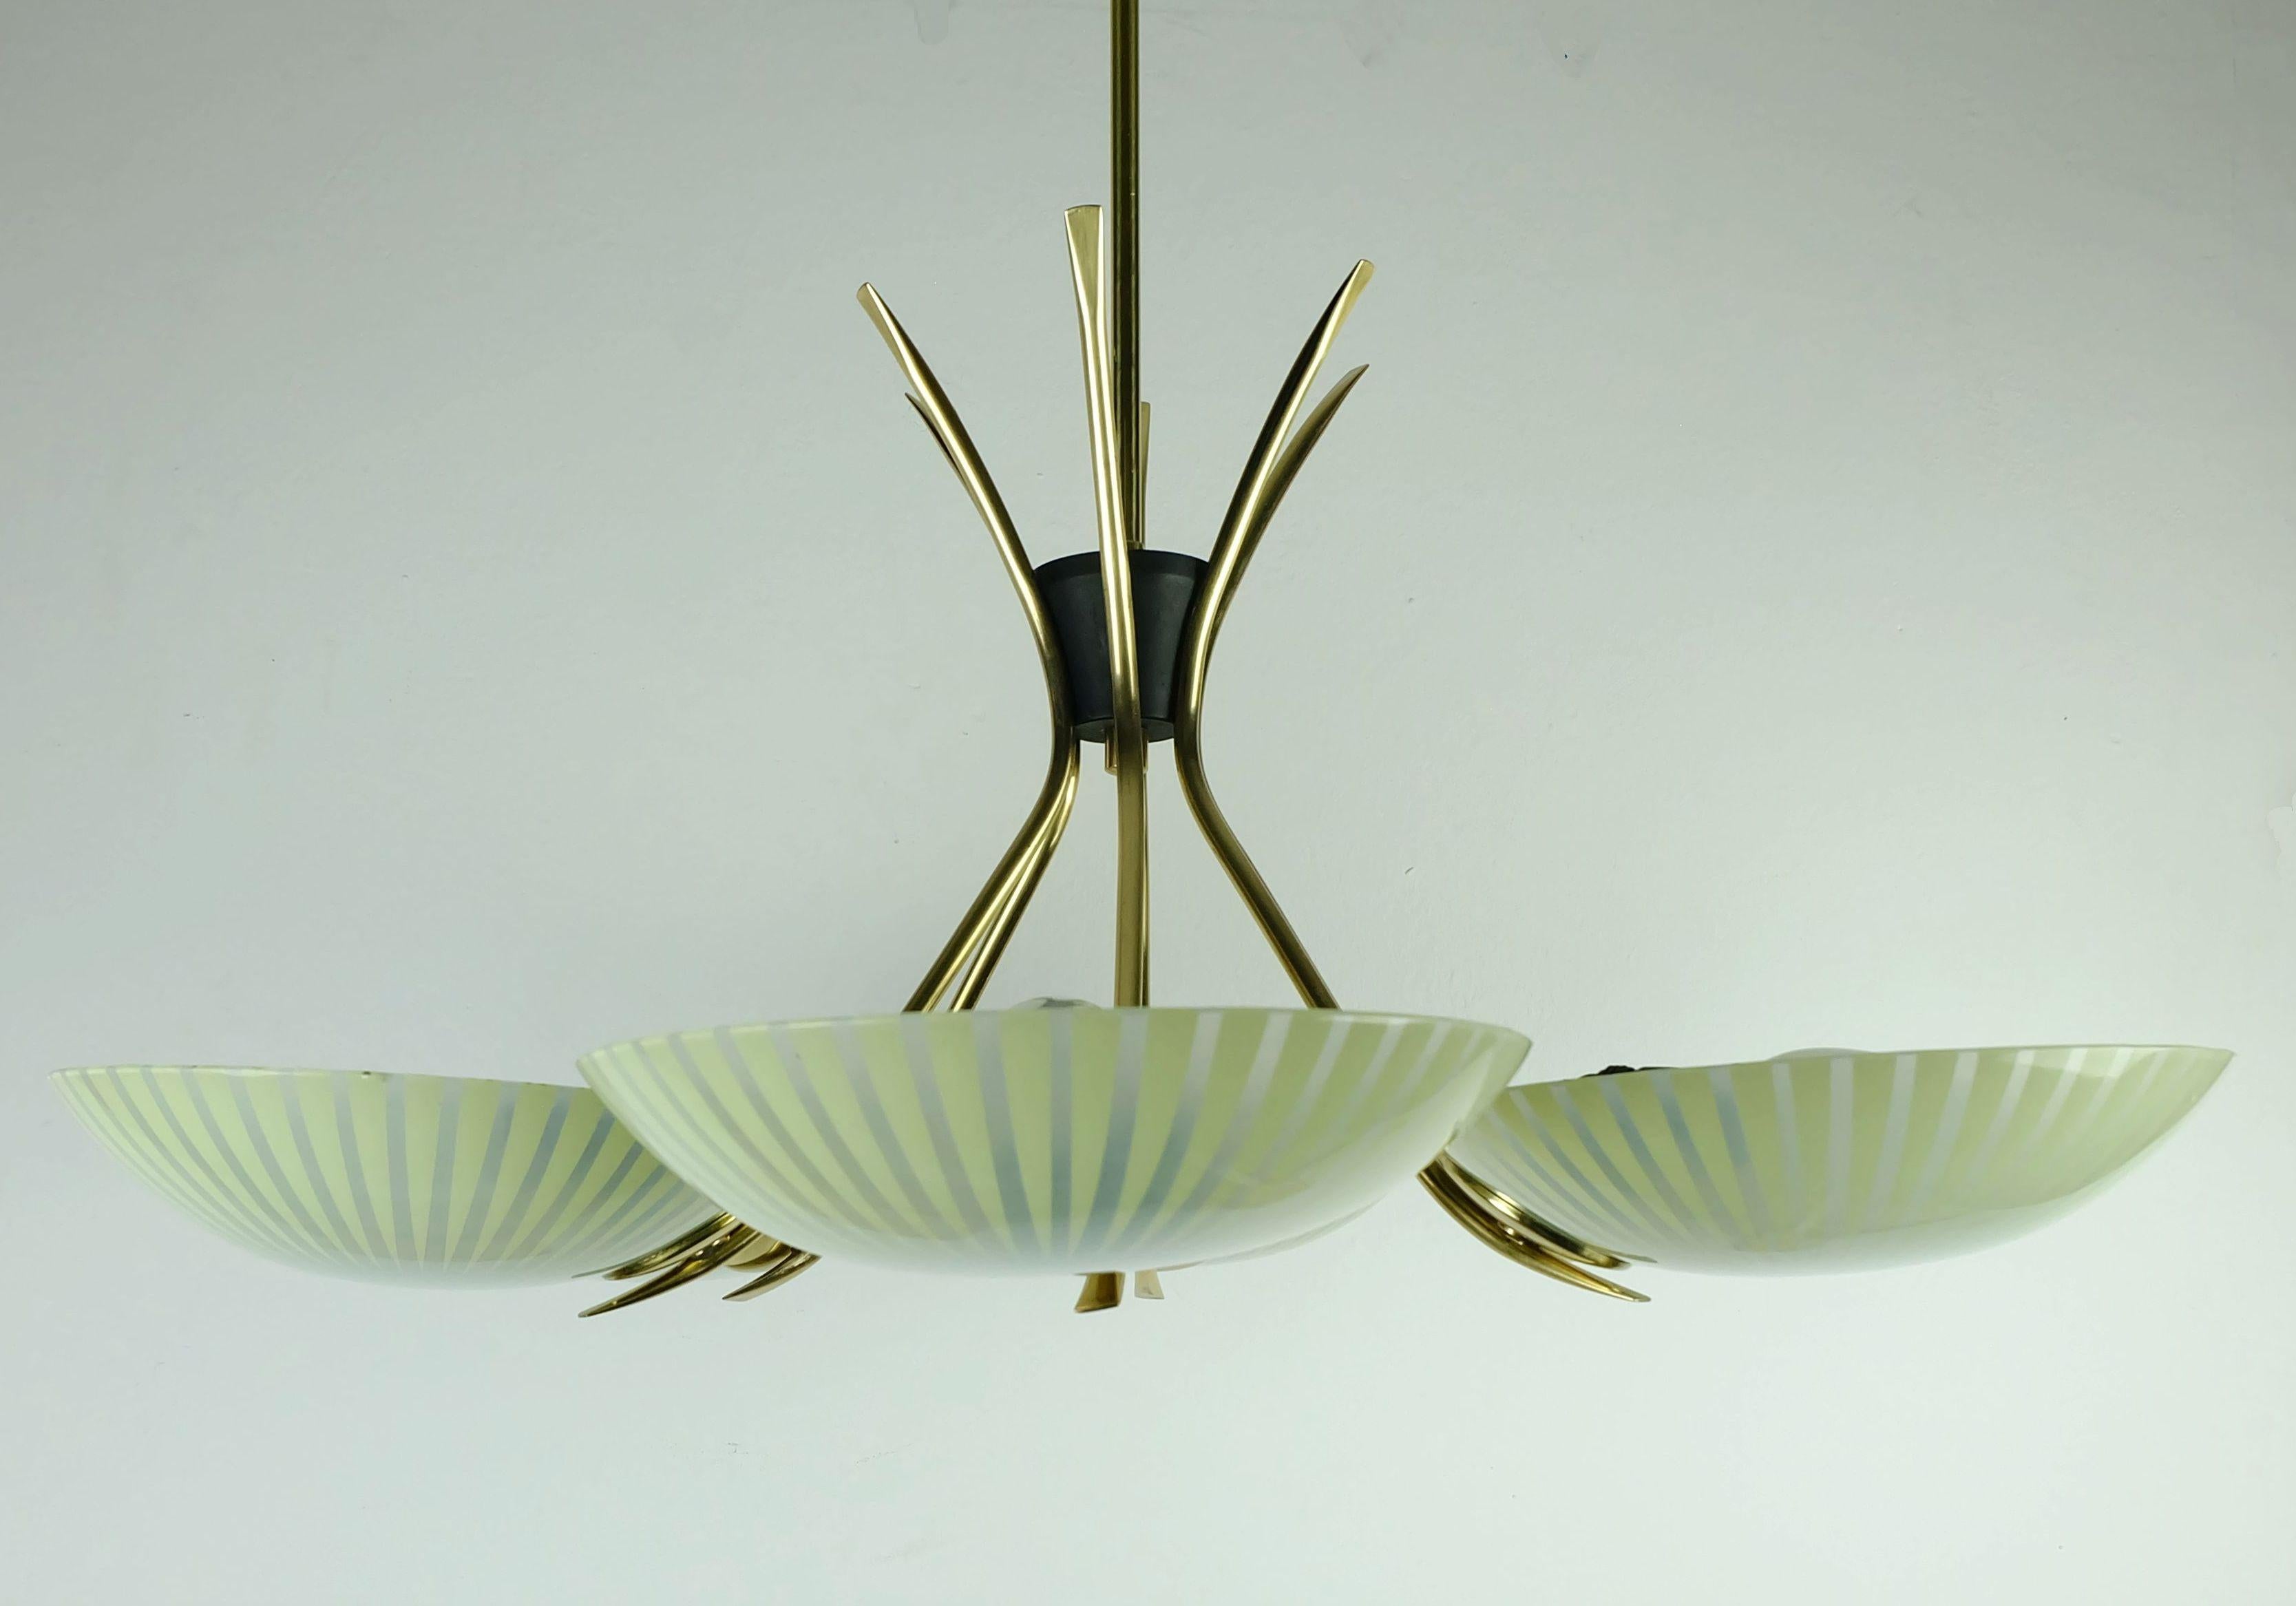 Very beautiful 1950s 6-light pendant lamp. The base is  made of brass and black lacquered metal. Six semi-transparent bowl-shaped glass shades with lemon yellow stripe pattern. Holds 6 E14 bulbs.

Very good condition. We recommend professional